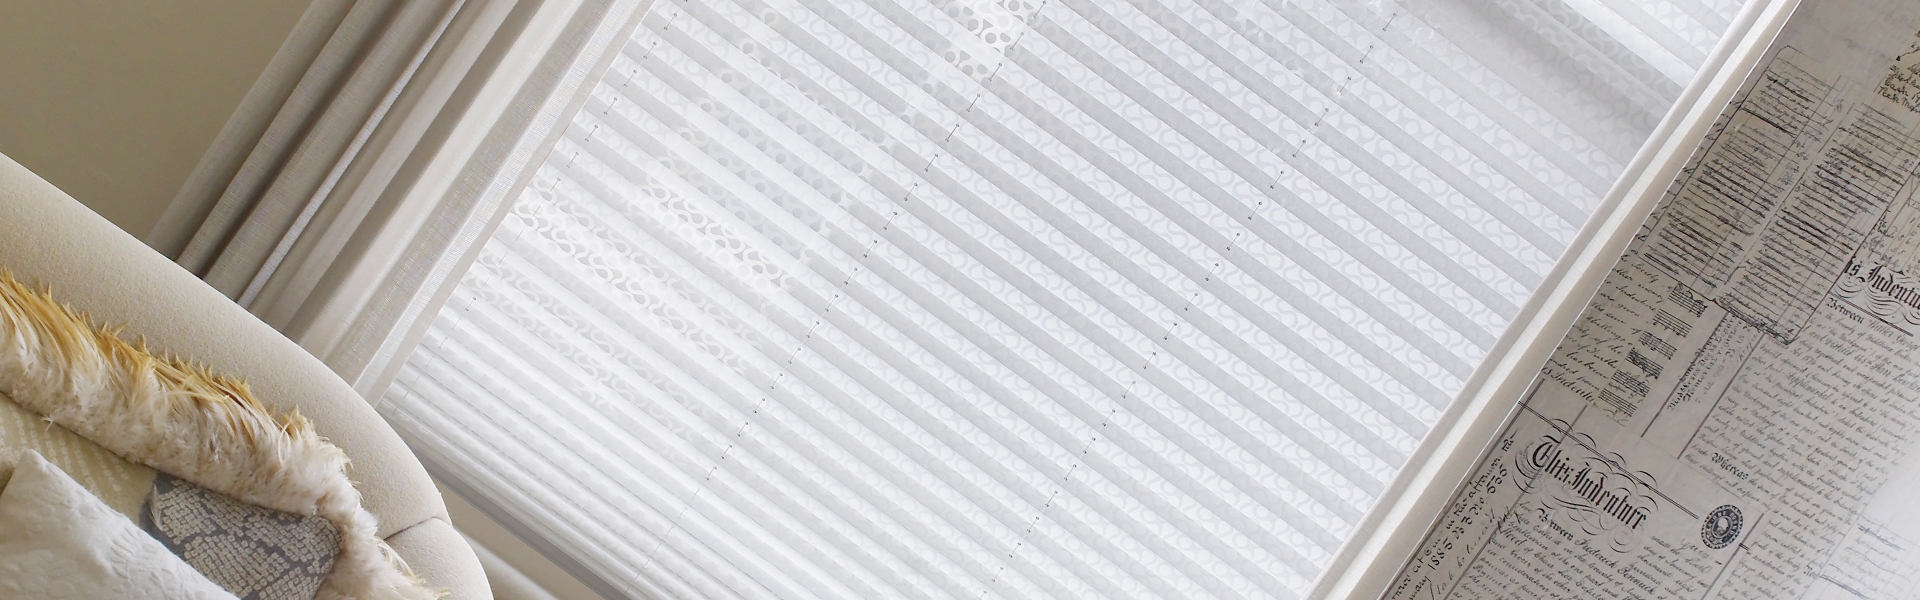 pleated-blinds-2